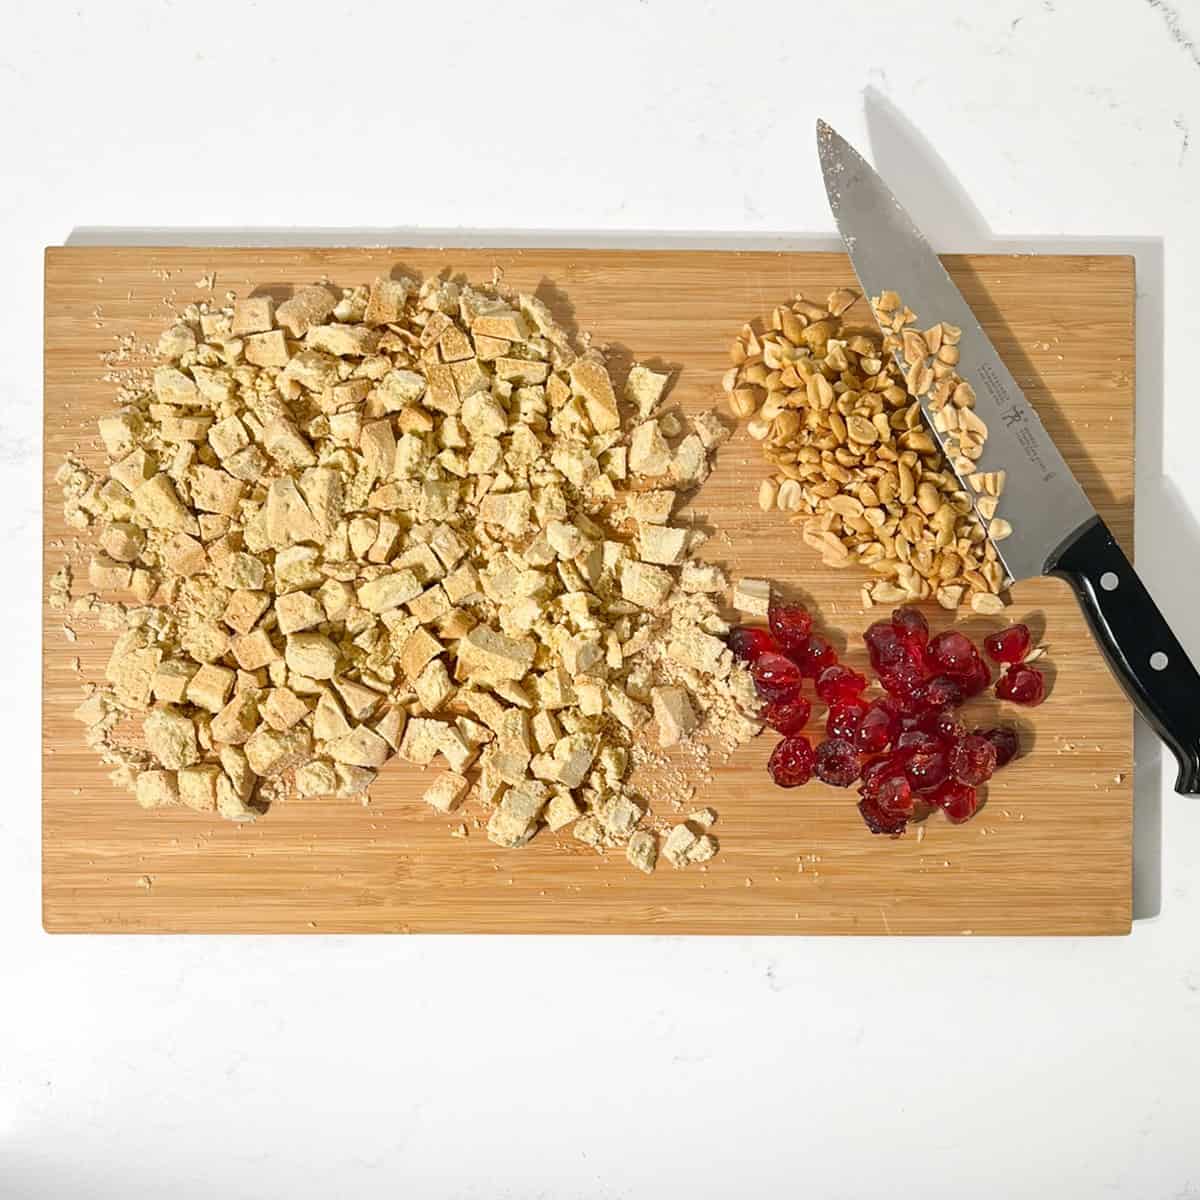 Chopped shortbread, peanuts and glace cherries on a wooden chopping board.